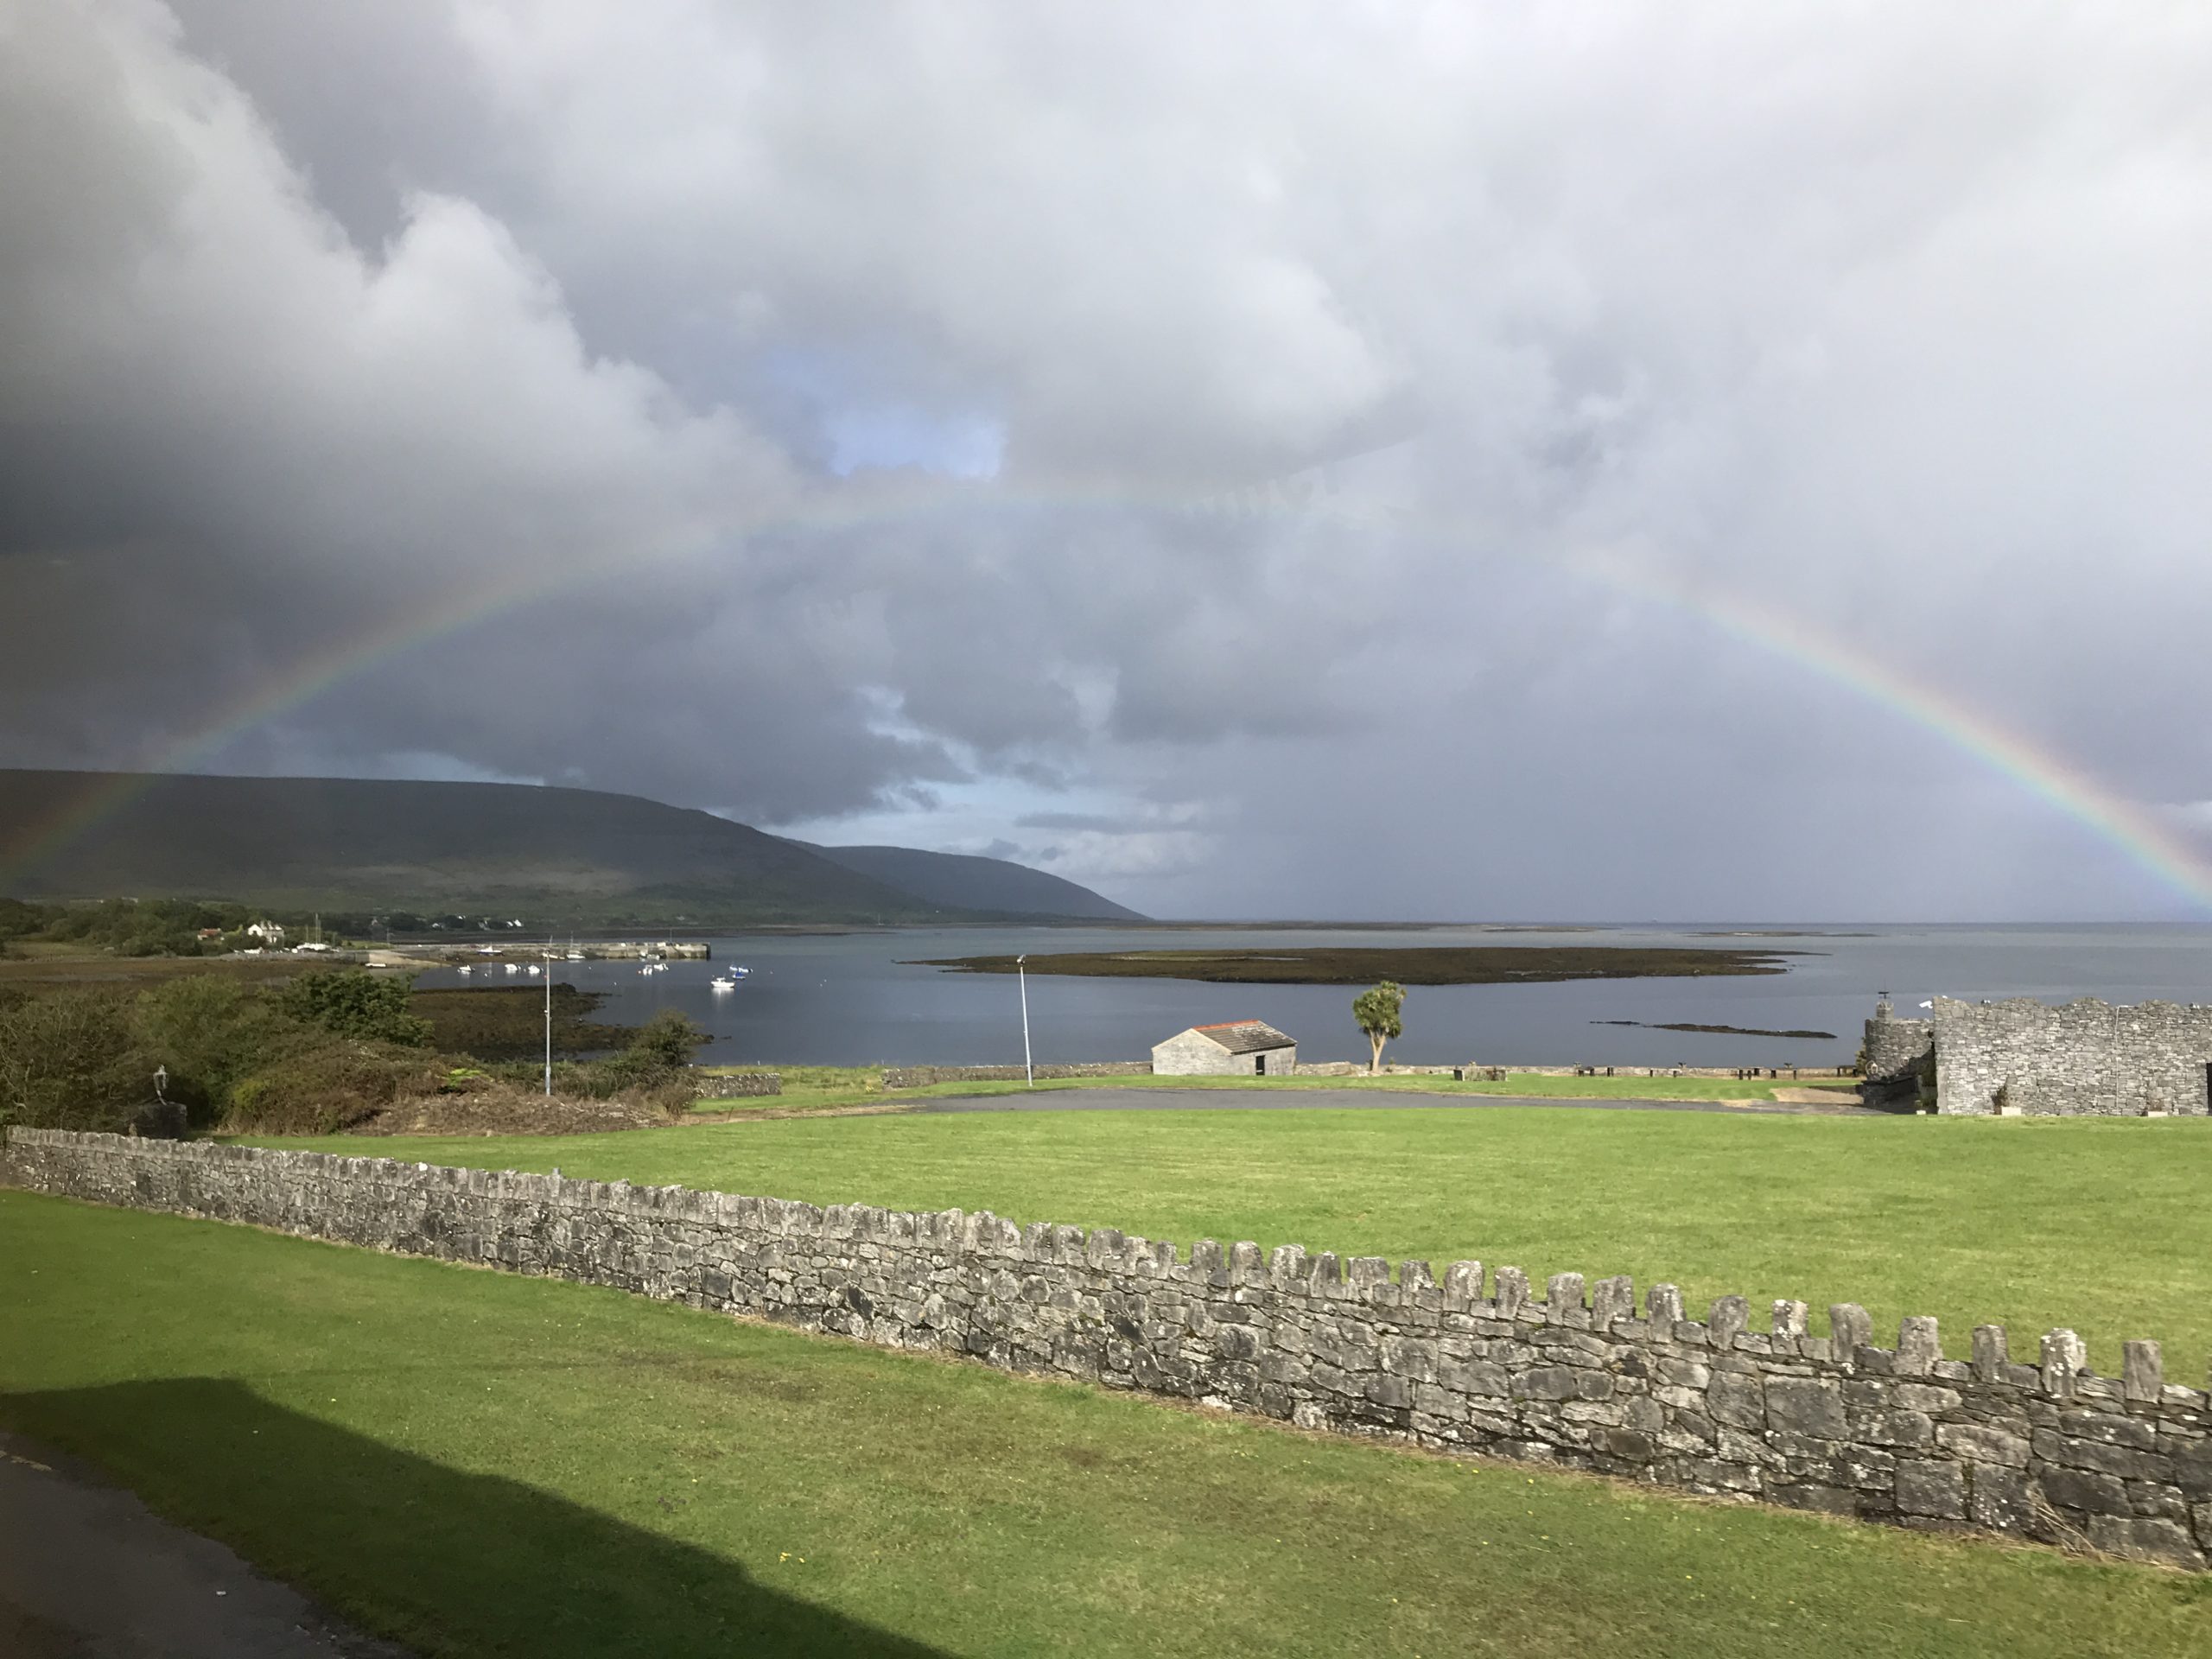 Green grass next to a lake with mountains in the background. Partly cloudy. A large rainbow spans over the water. Along the Wild Atlantic Way between Galway and Doolin, Ireland.